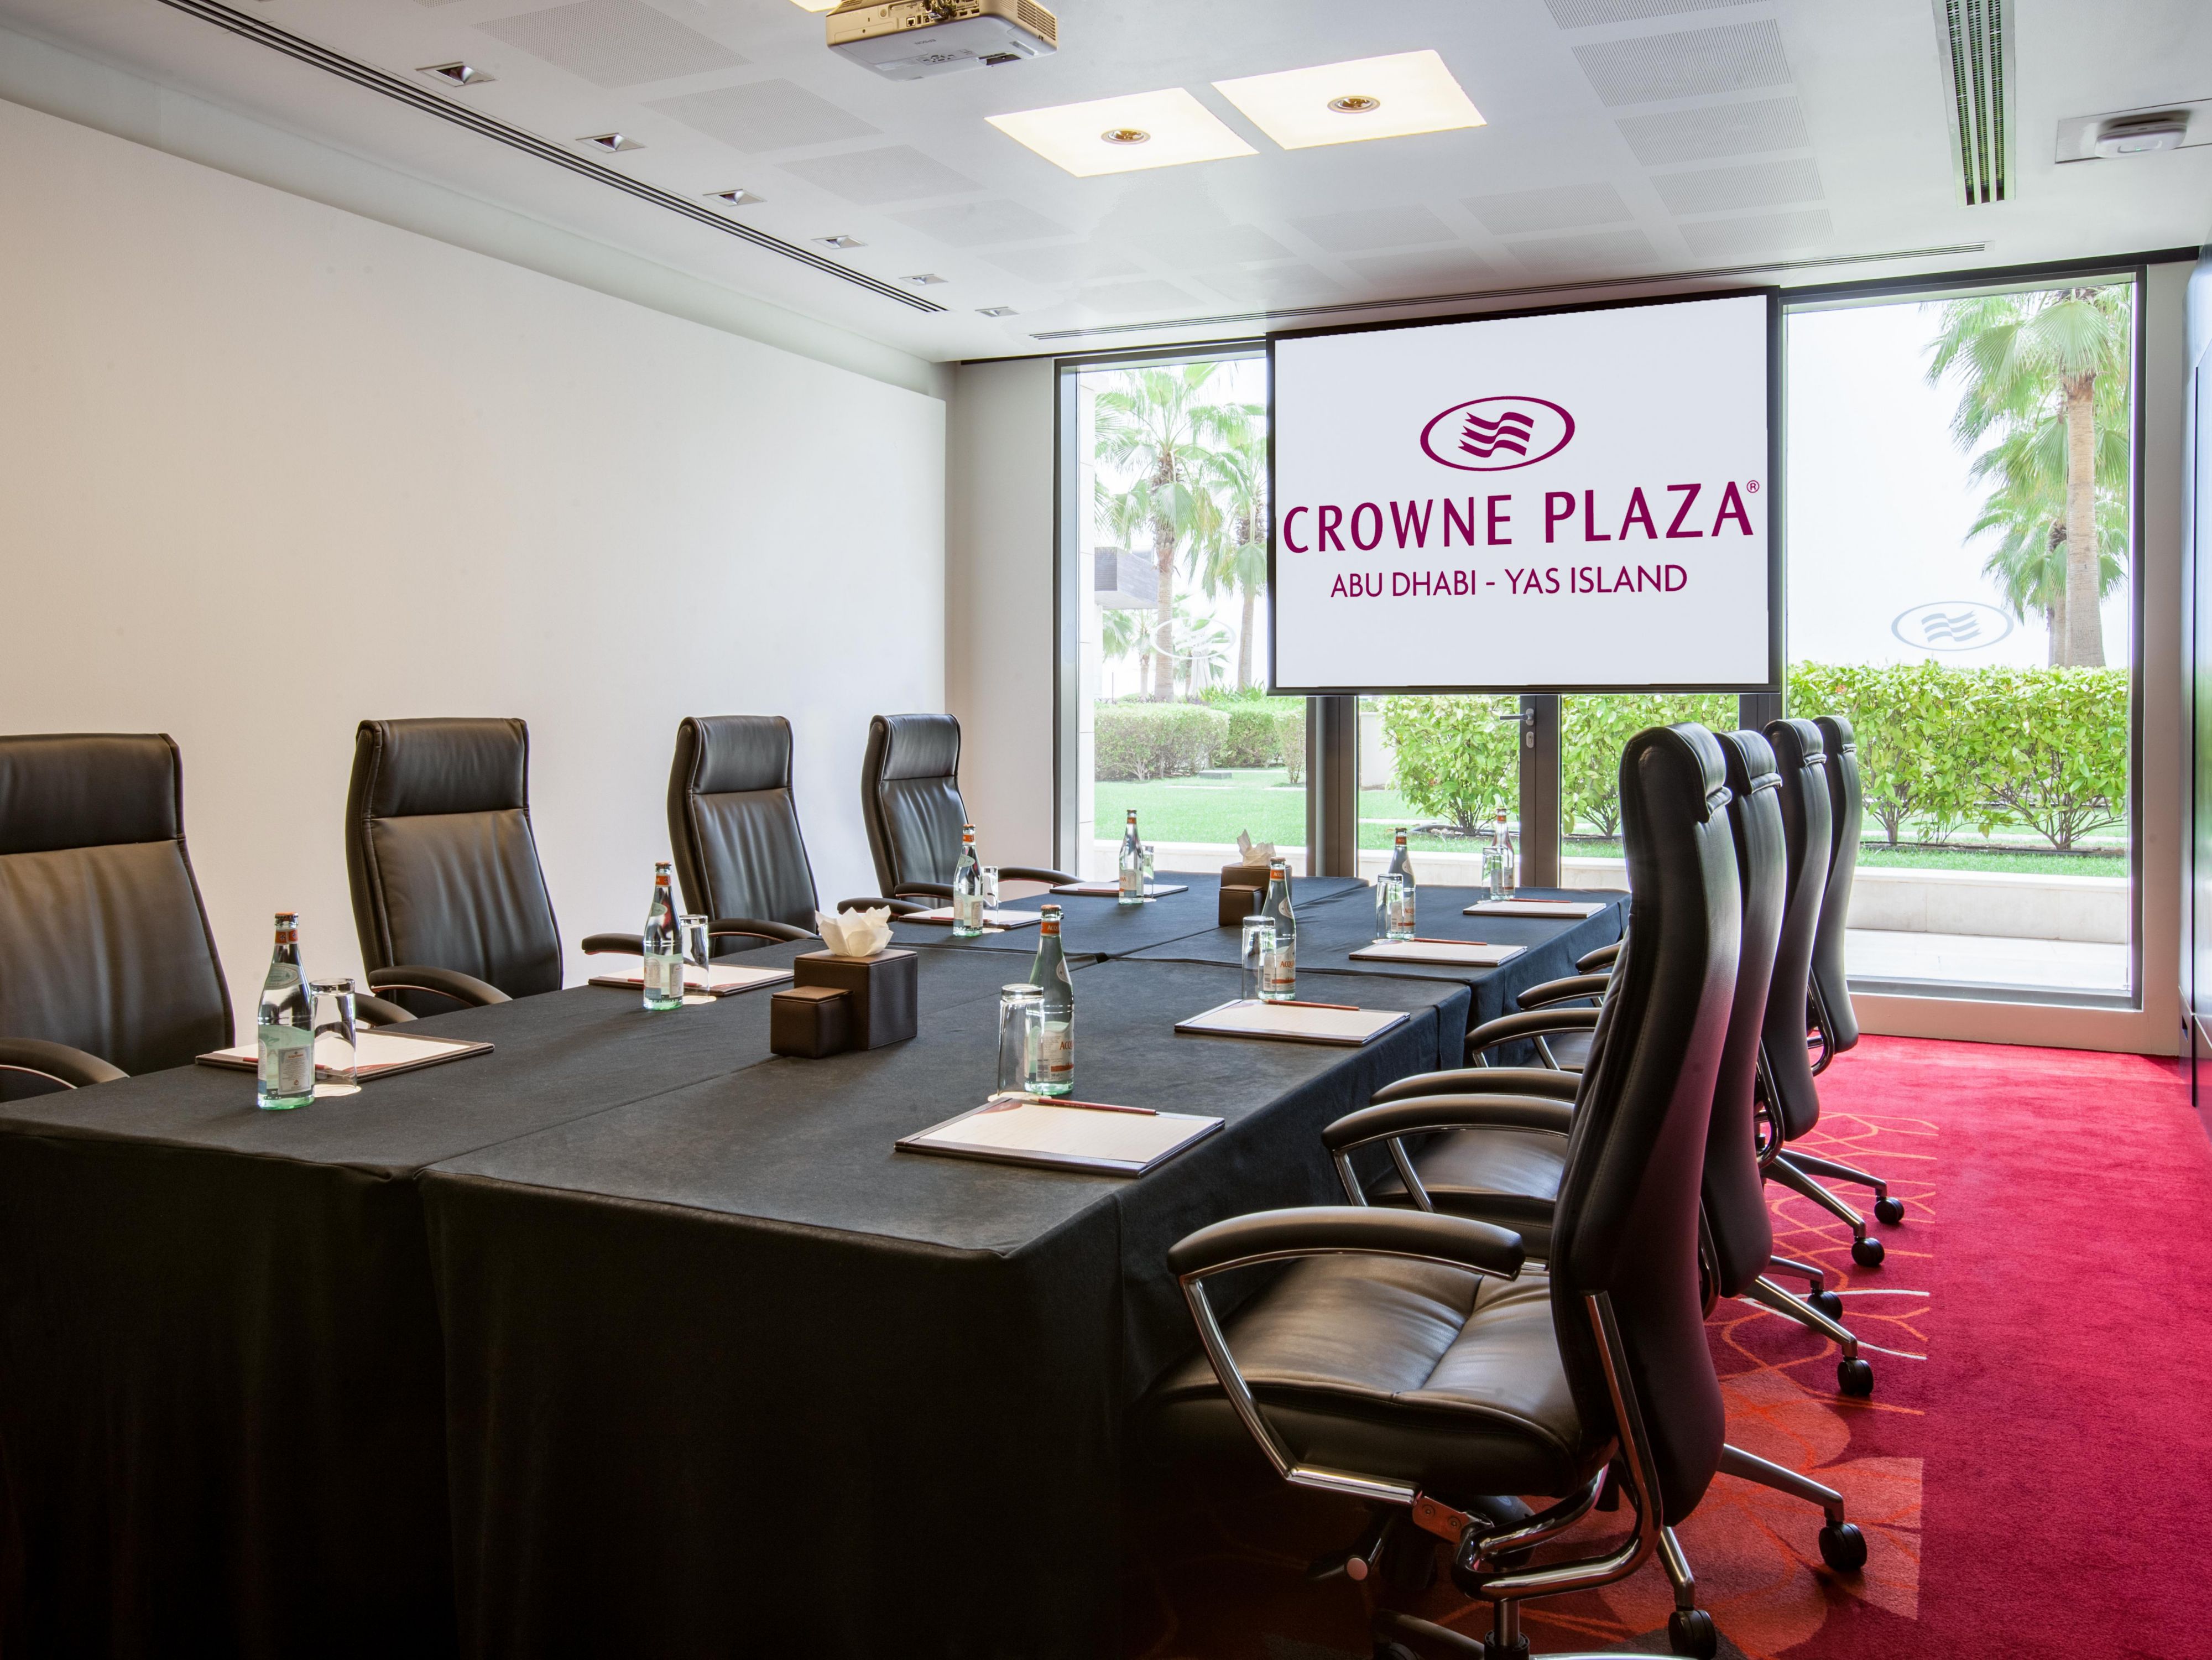 Extensive meetings and events facilities with state-of-the-art audio-visual technology, natural lighting and a view of the garden.